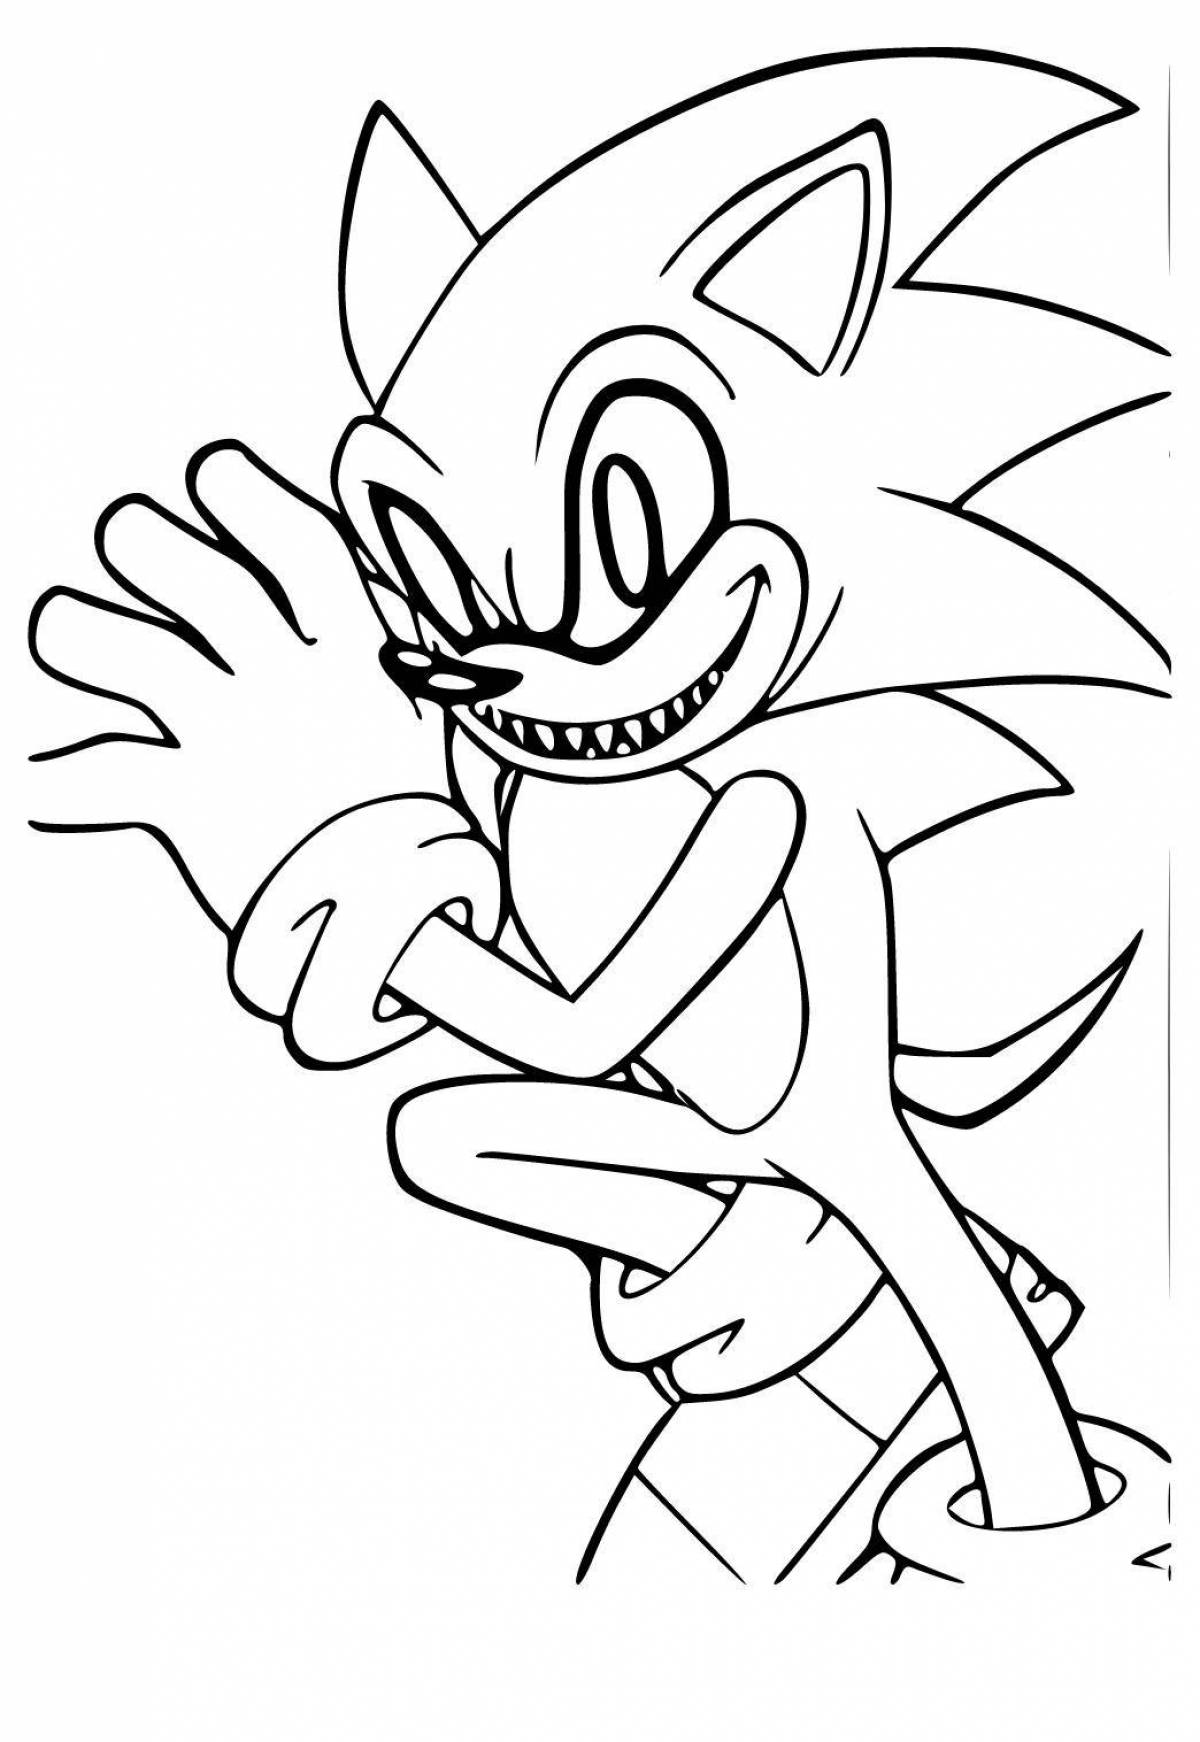 Coloring book evil sonic - sickly